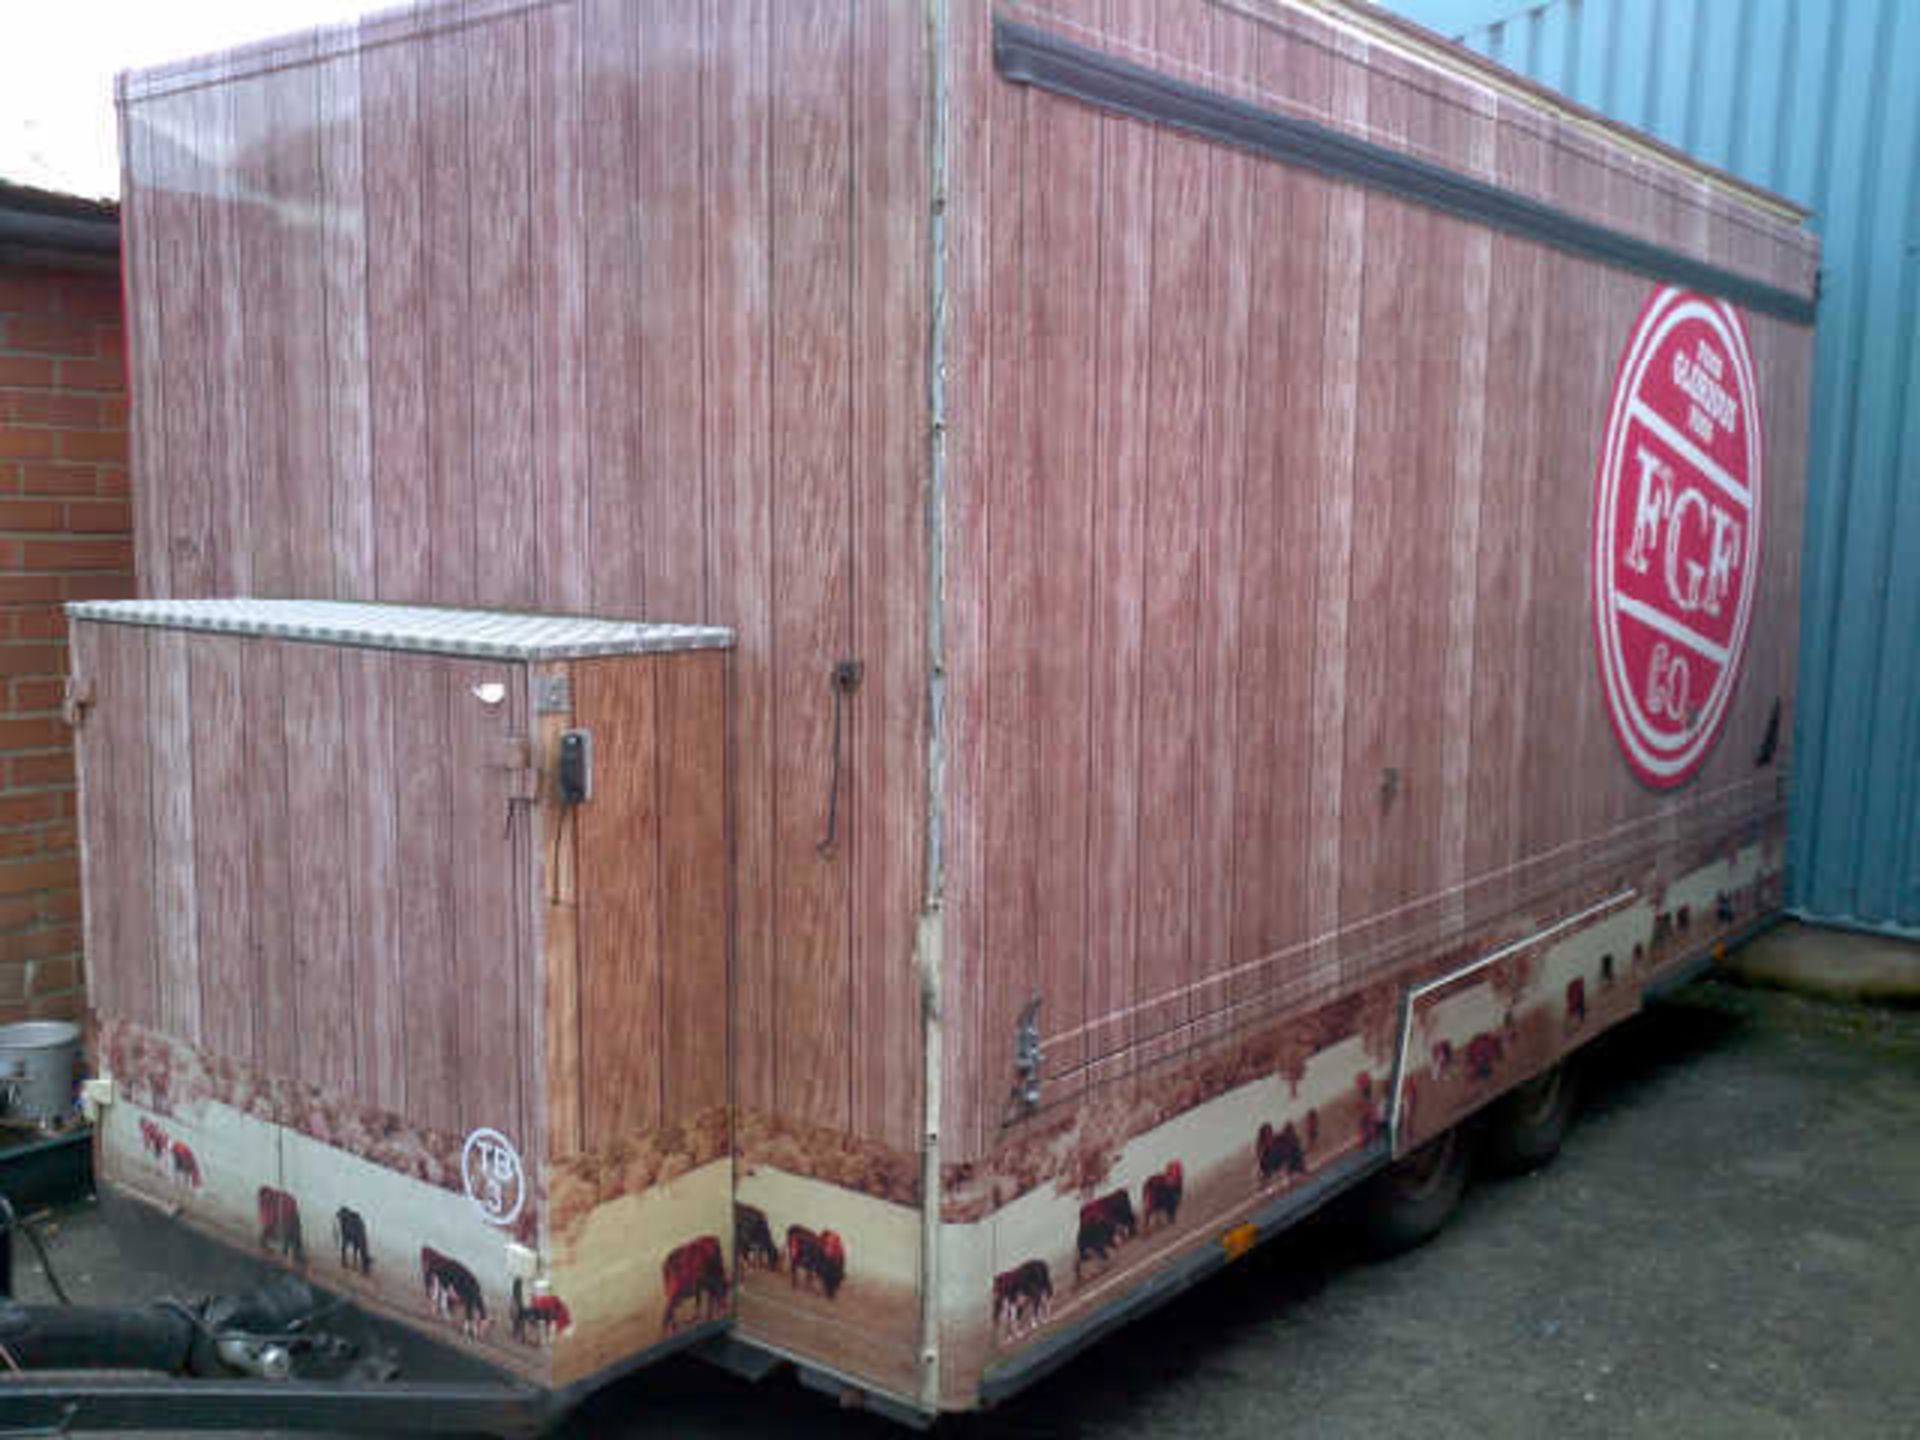 LARGE DOUBLE AXLE CATERING TRAILER WITH FULLY FITTED INTERIOR UNIT LENGTH 4.6M X2.4M WIDE, OVERAL